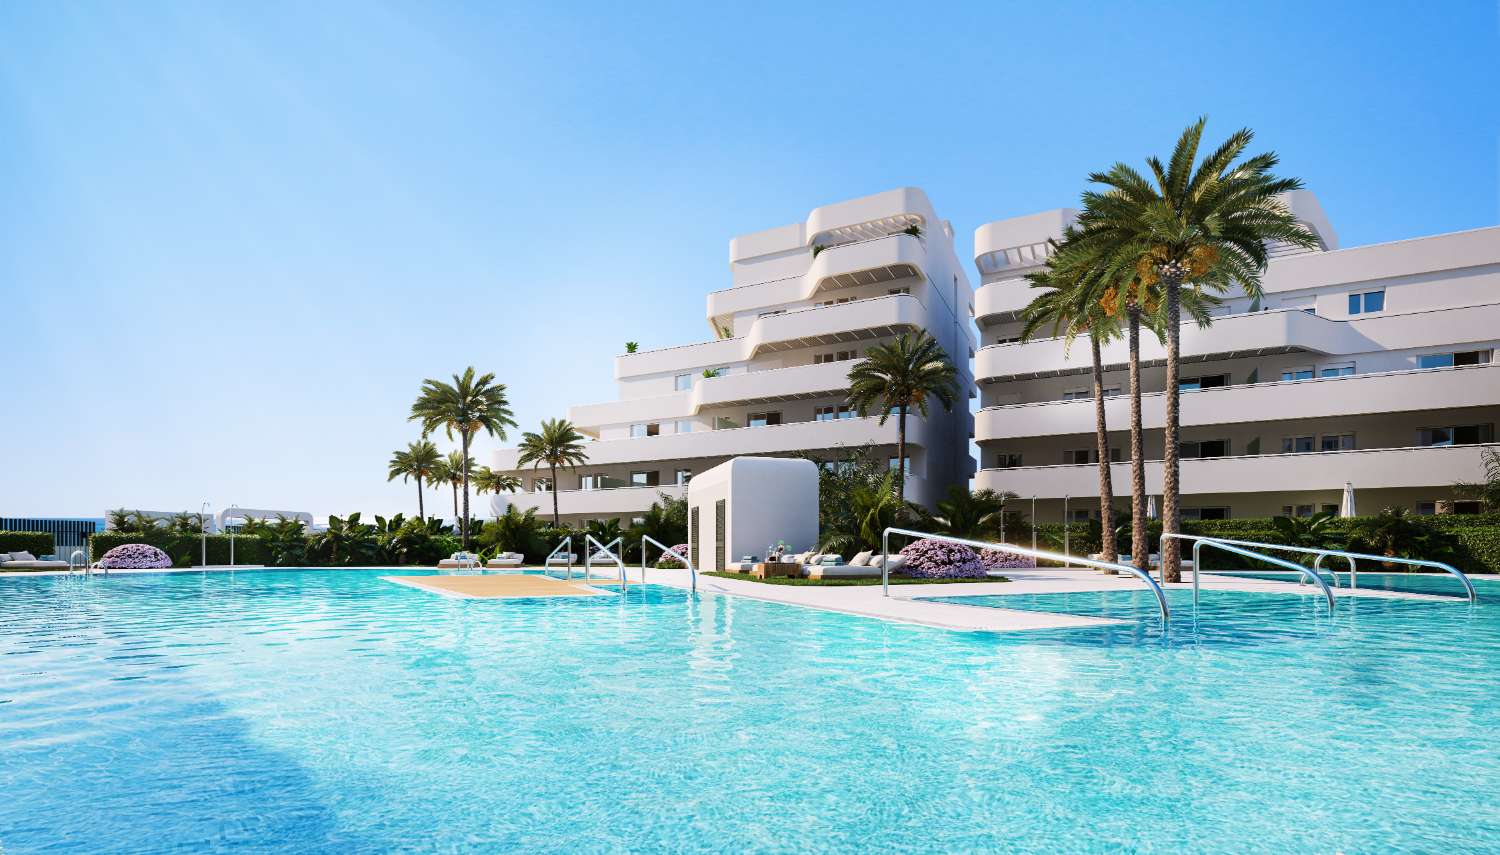 New apartments 300 m from the beach!